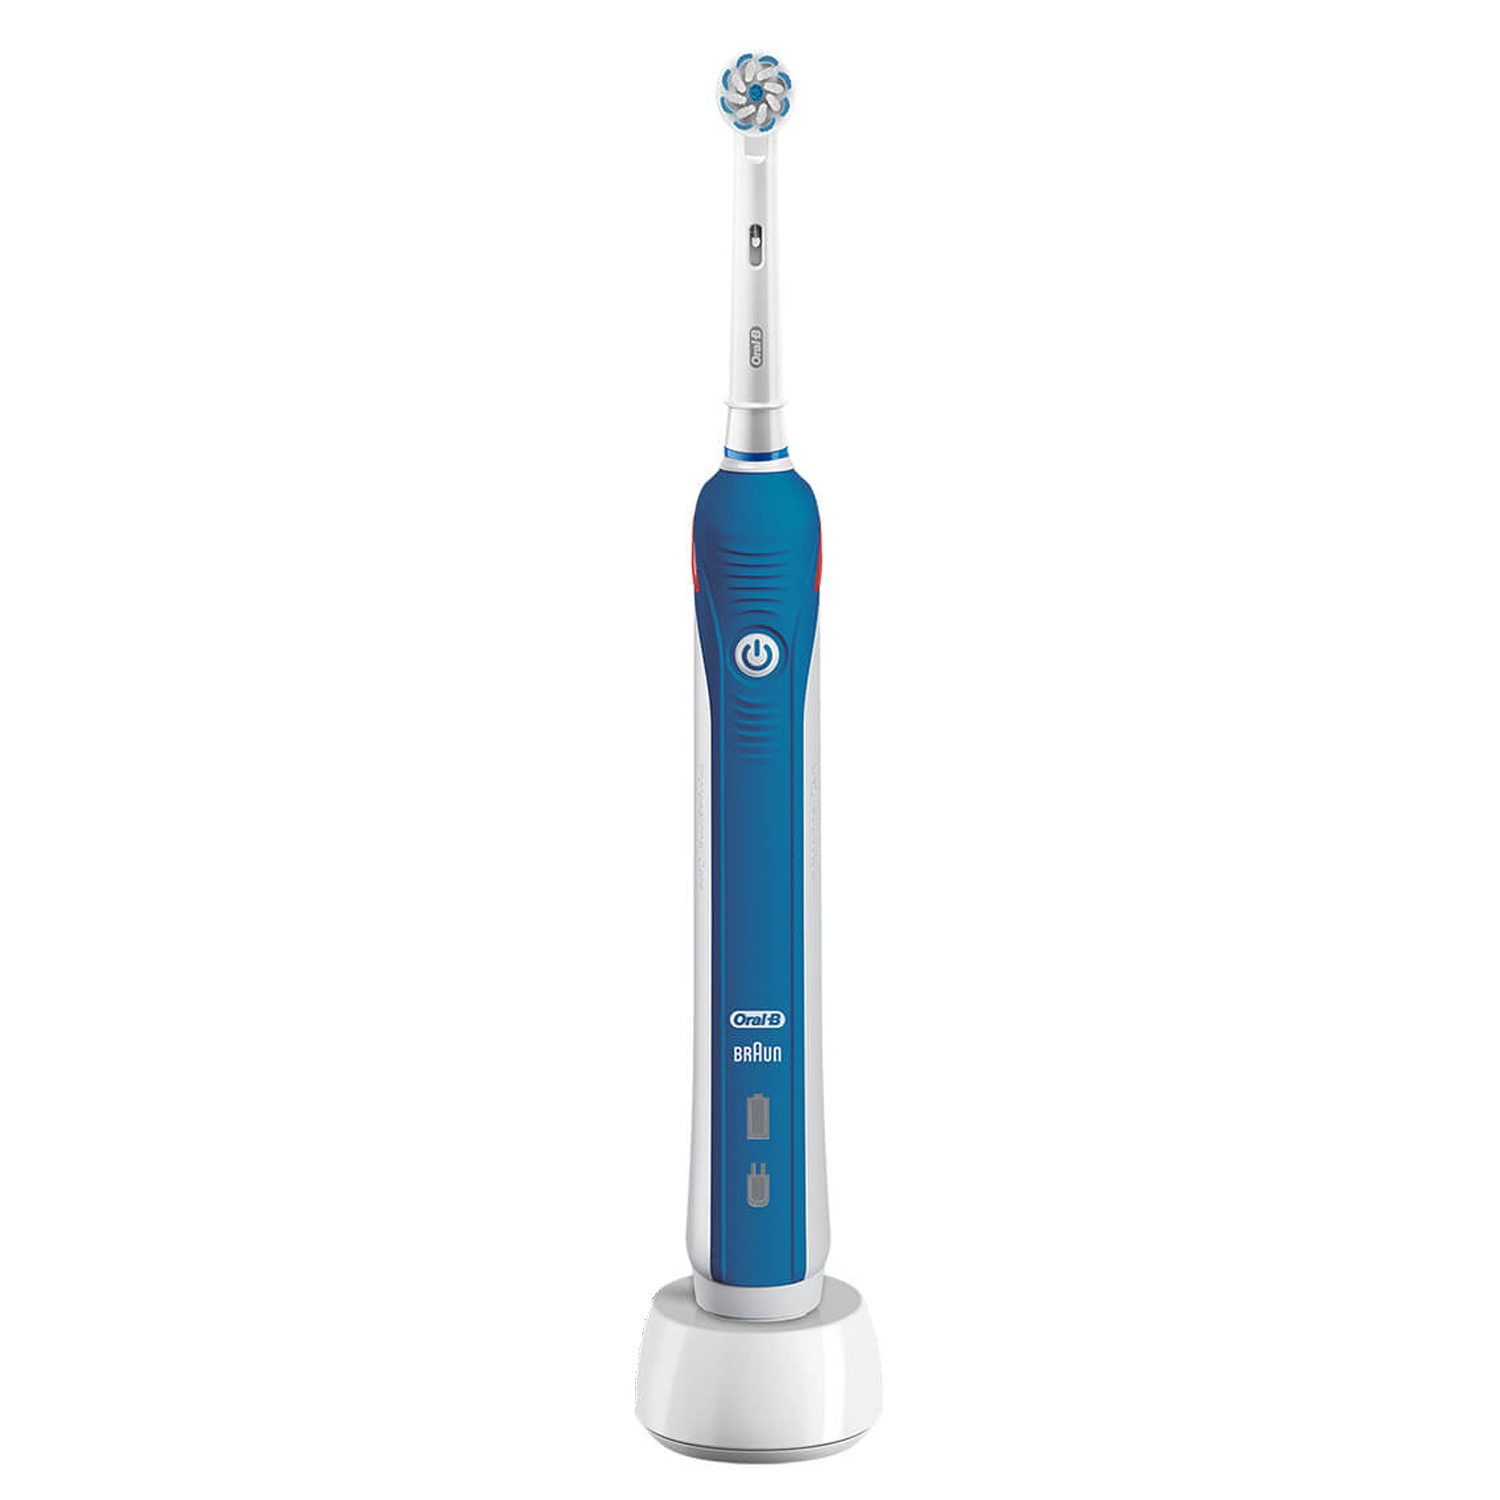 OBPR2SE - Toothbrush - Shavers Direct